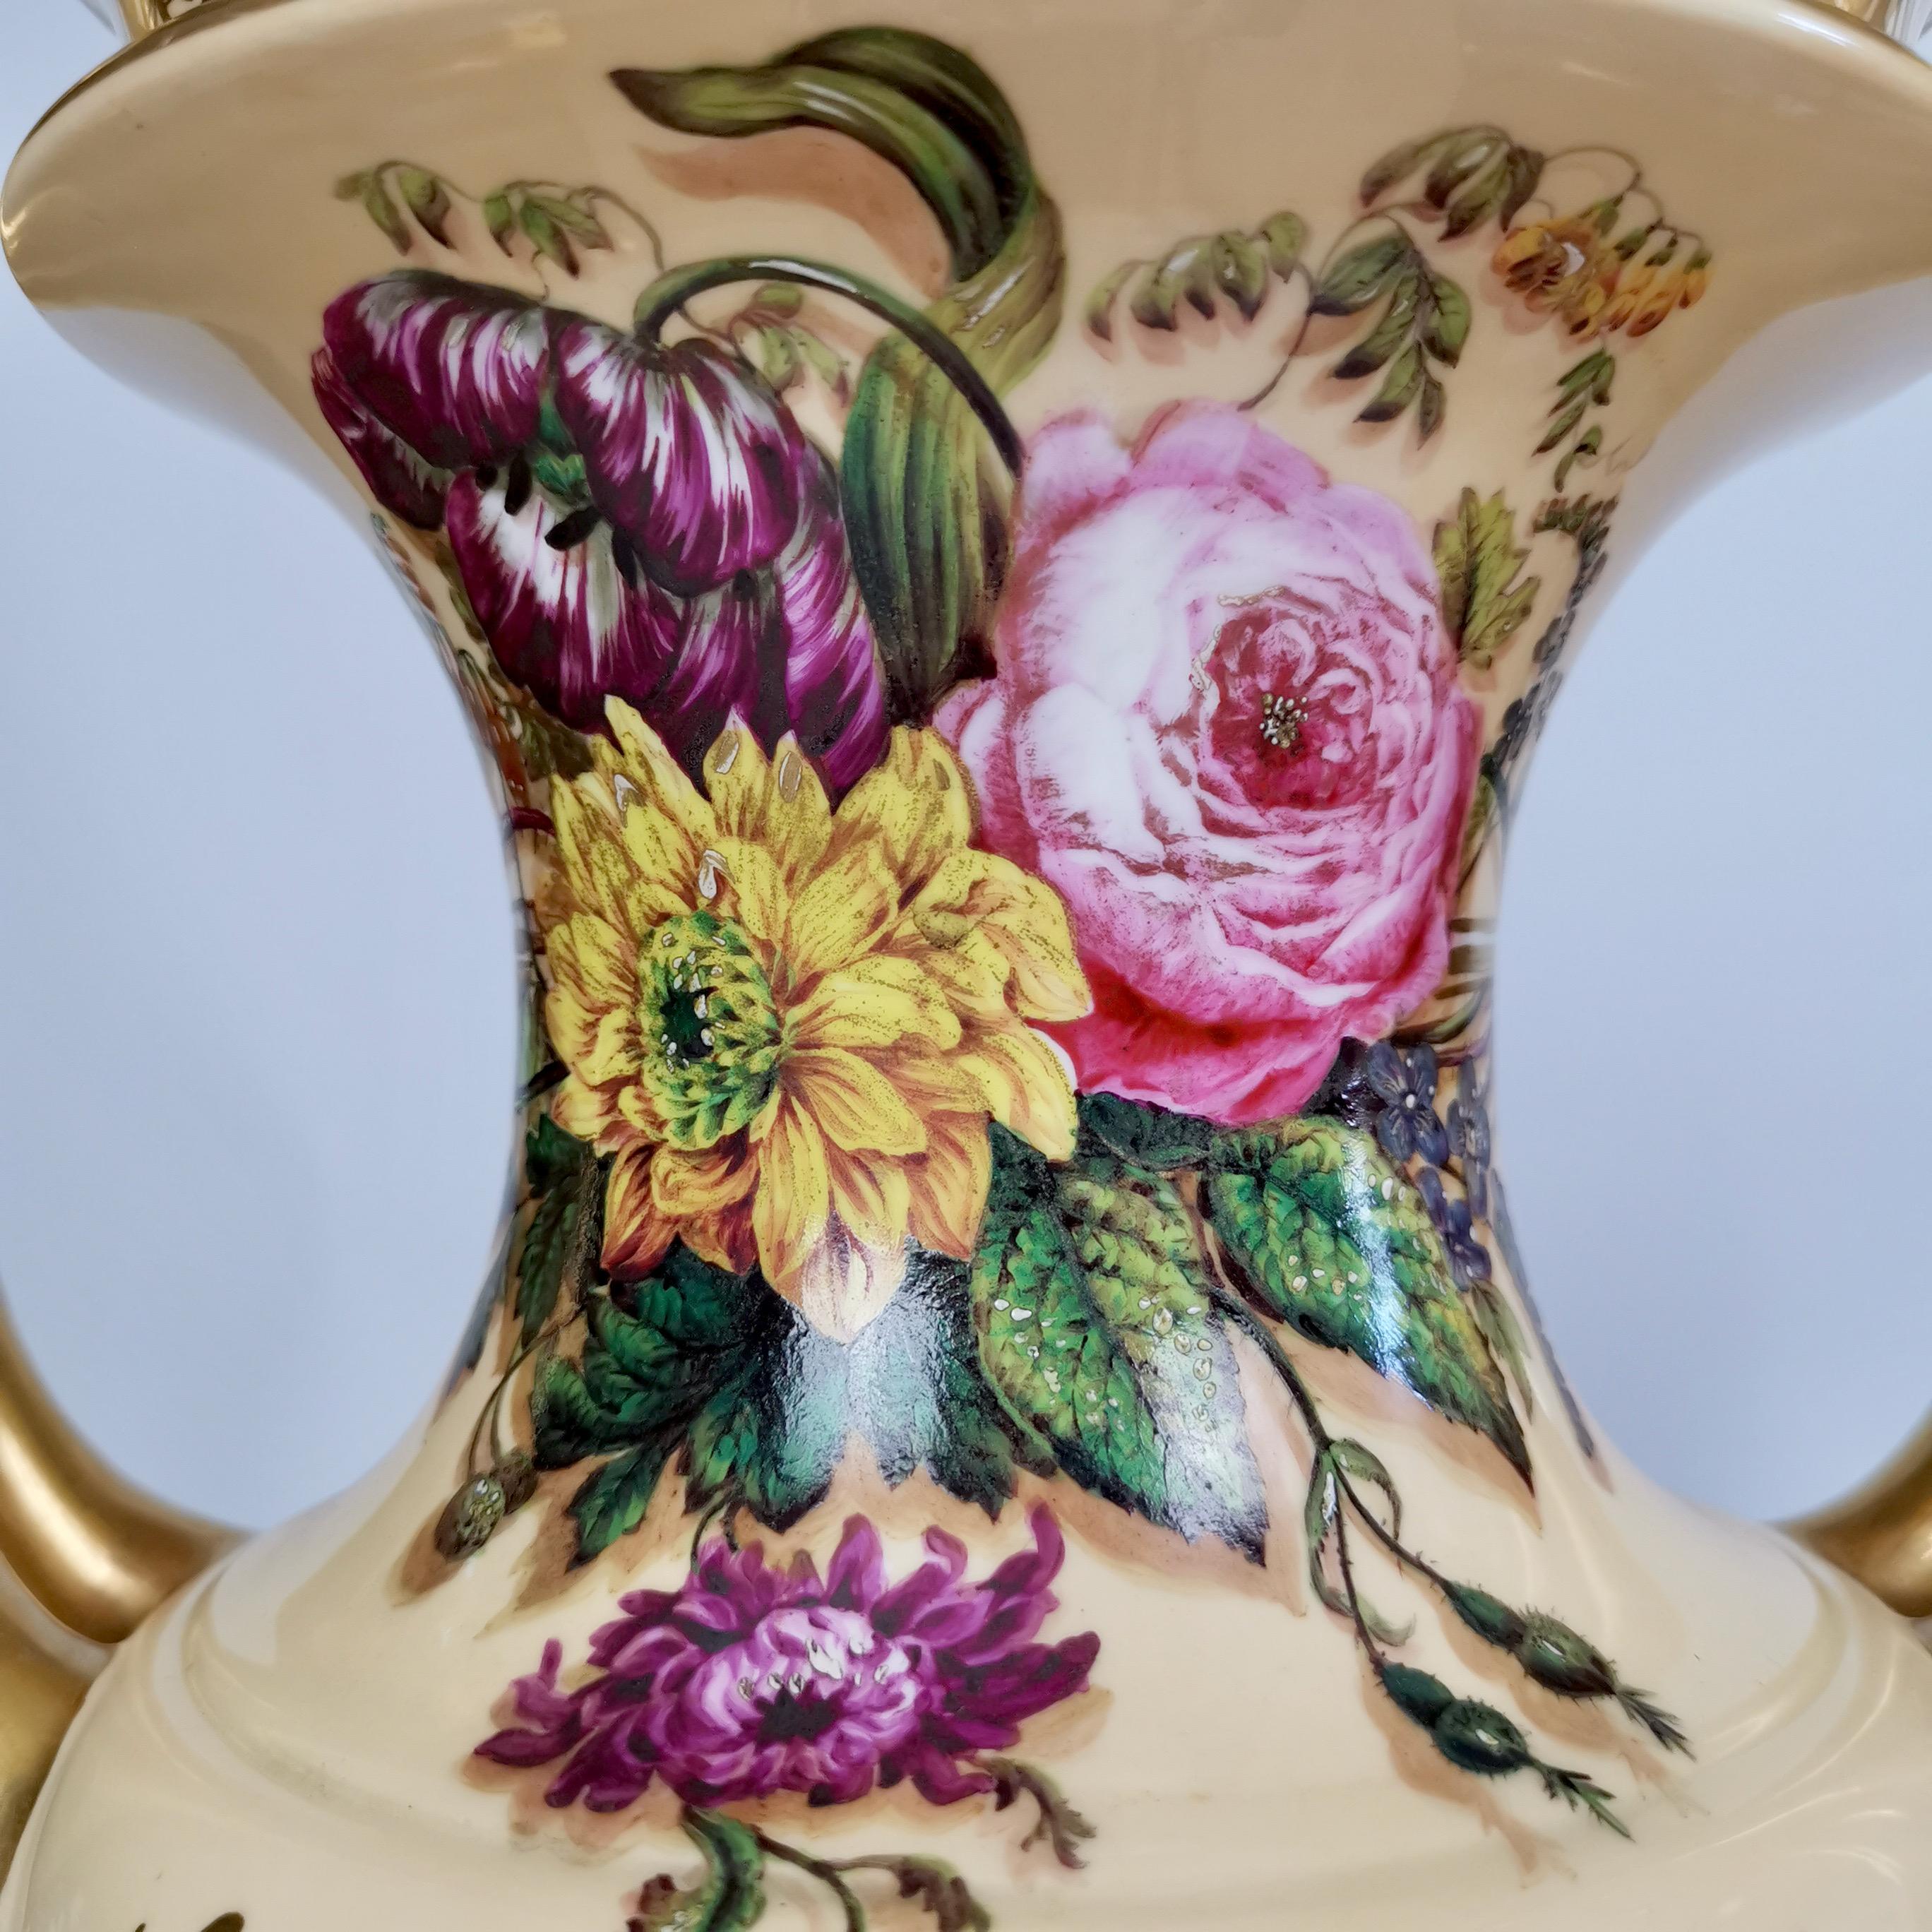 Hand-Painted Copeland & Garrett Porcelain Vases, Flowers and Fruits, Rococo Revival 1833-1847